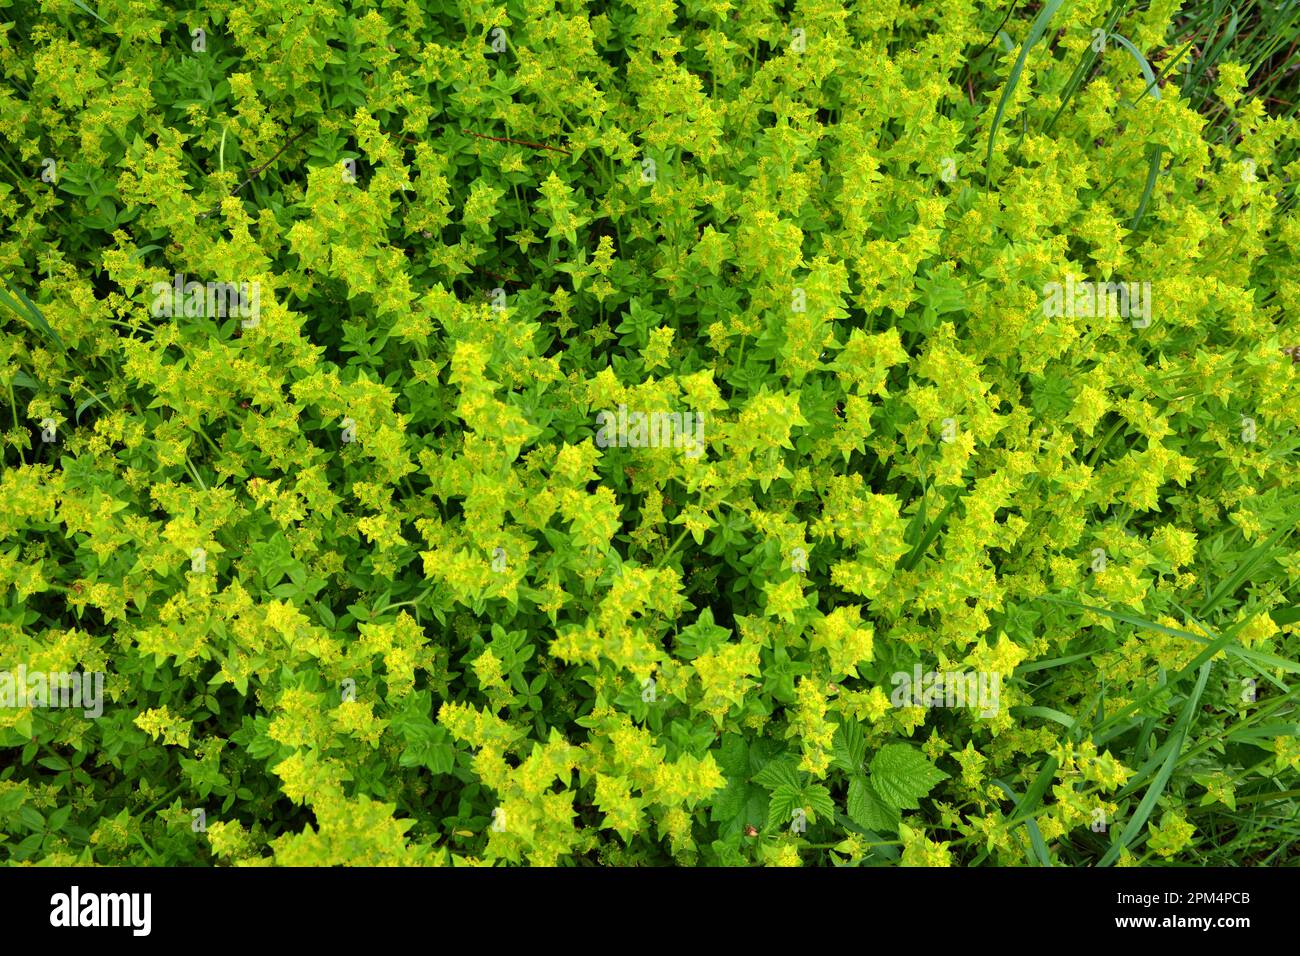 Cruciata laevipes grows among grasses in the wild Stock Photo